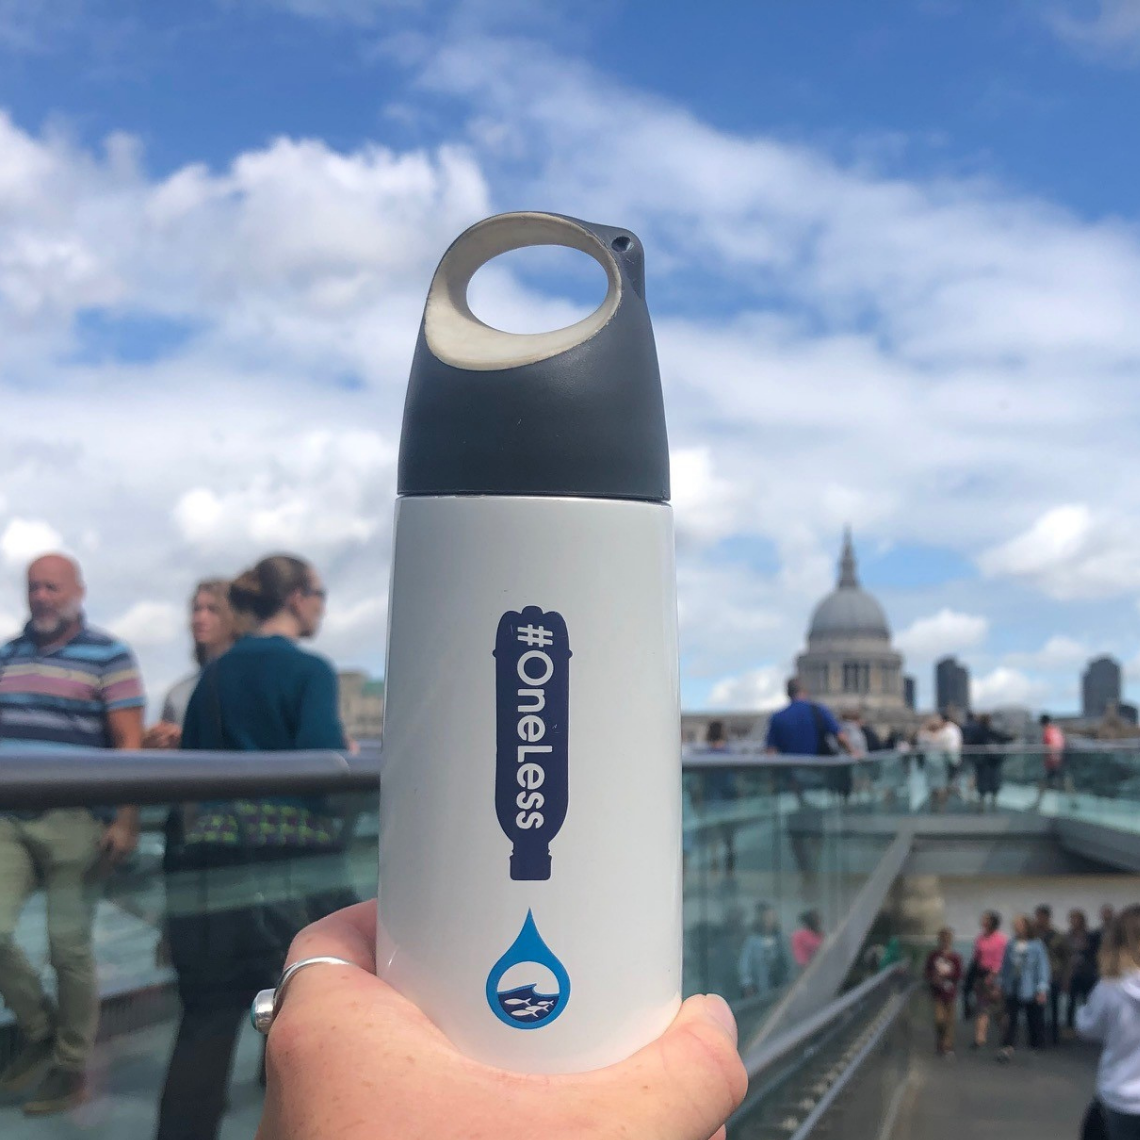 JOIN #ONELESS IN CALLING ON THE FUTURE MAYOR OF LONDON TO TACKLE SINGLE-USE PLASTIC IN THE CITY